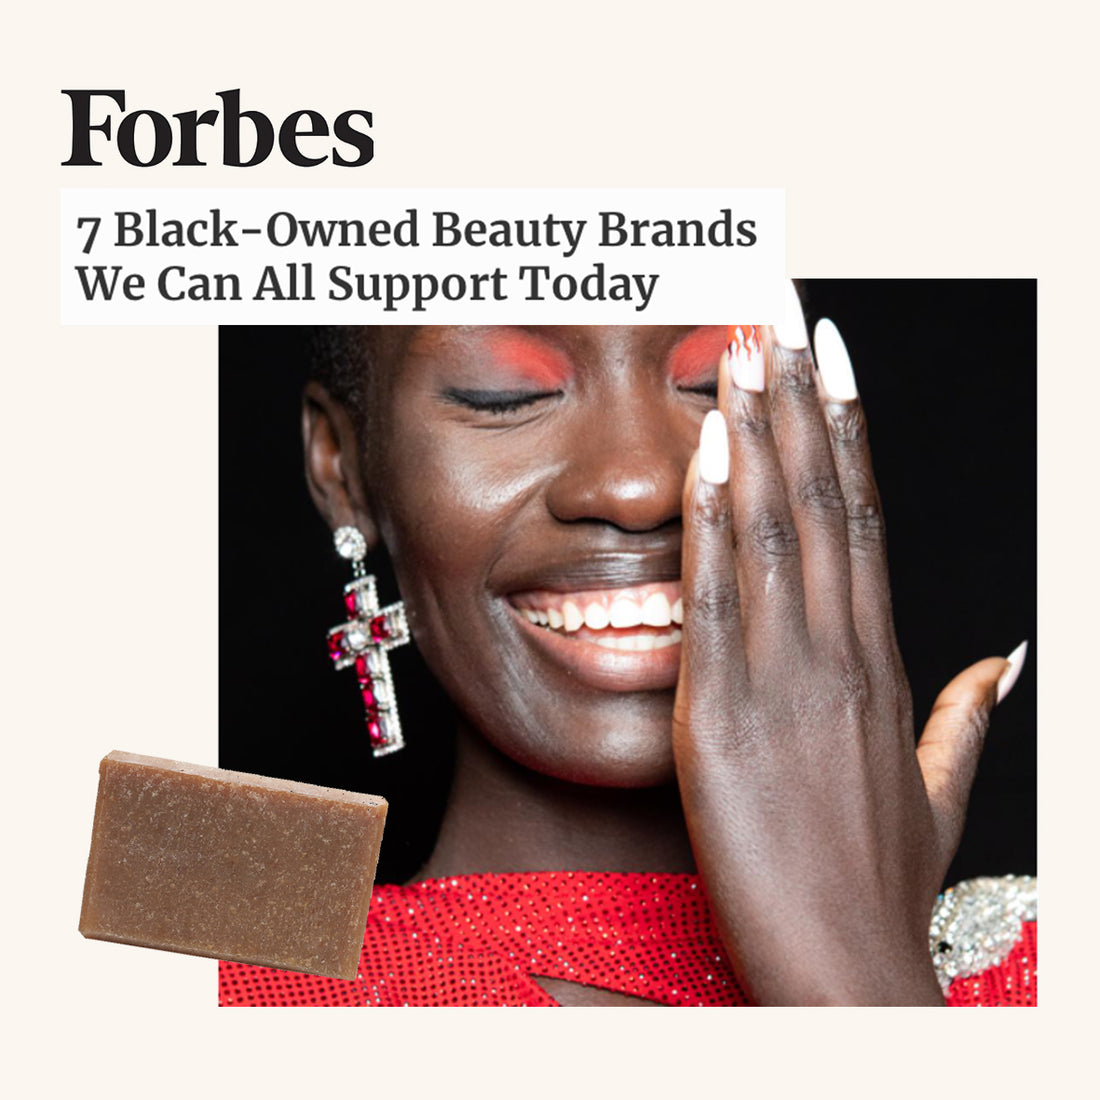 FORBES: 7 Black-Owned Beauty Brands We Can All Support Today